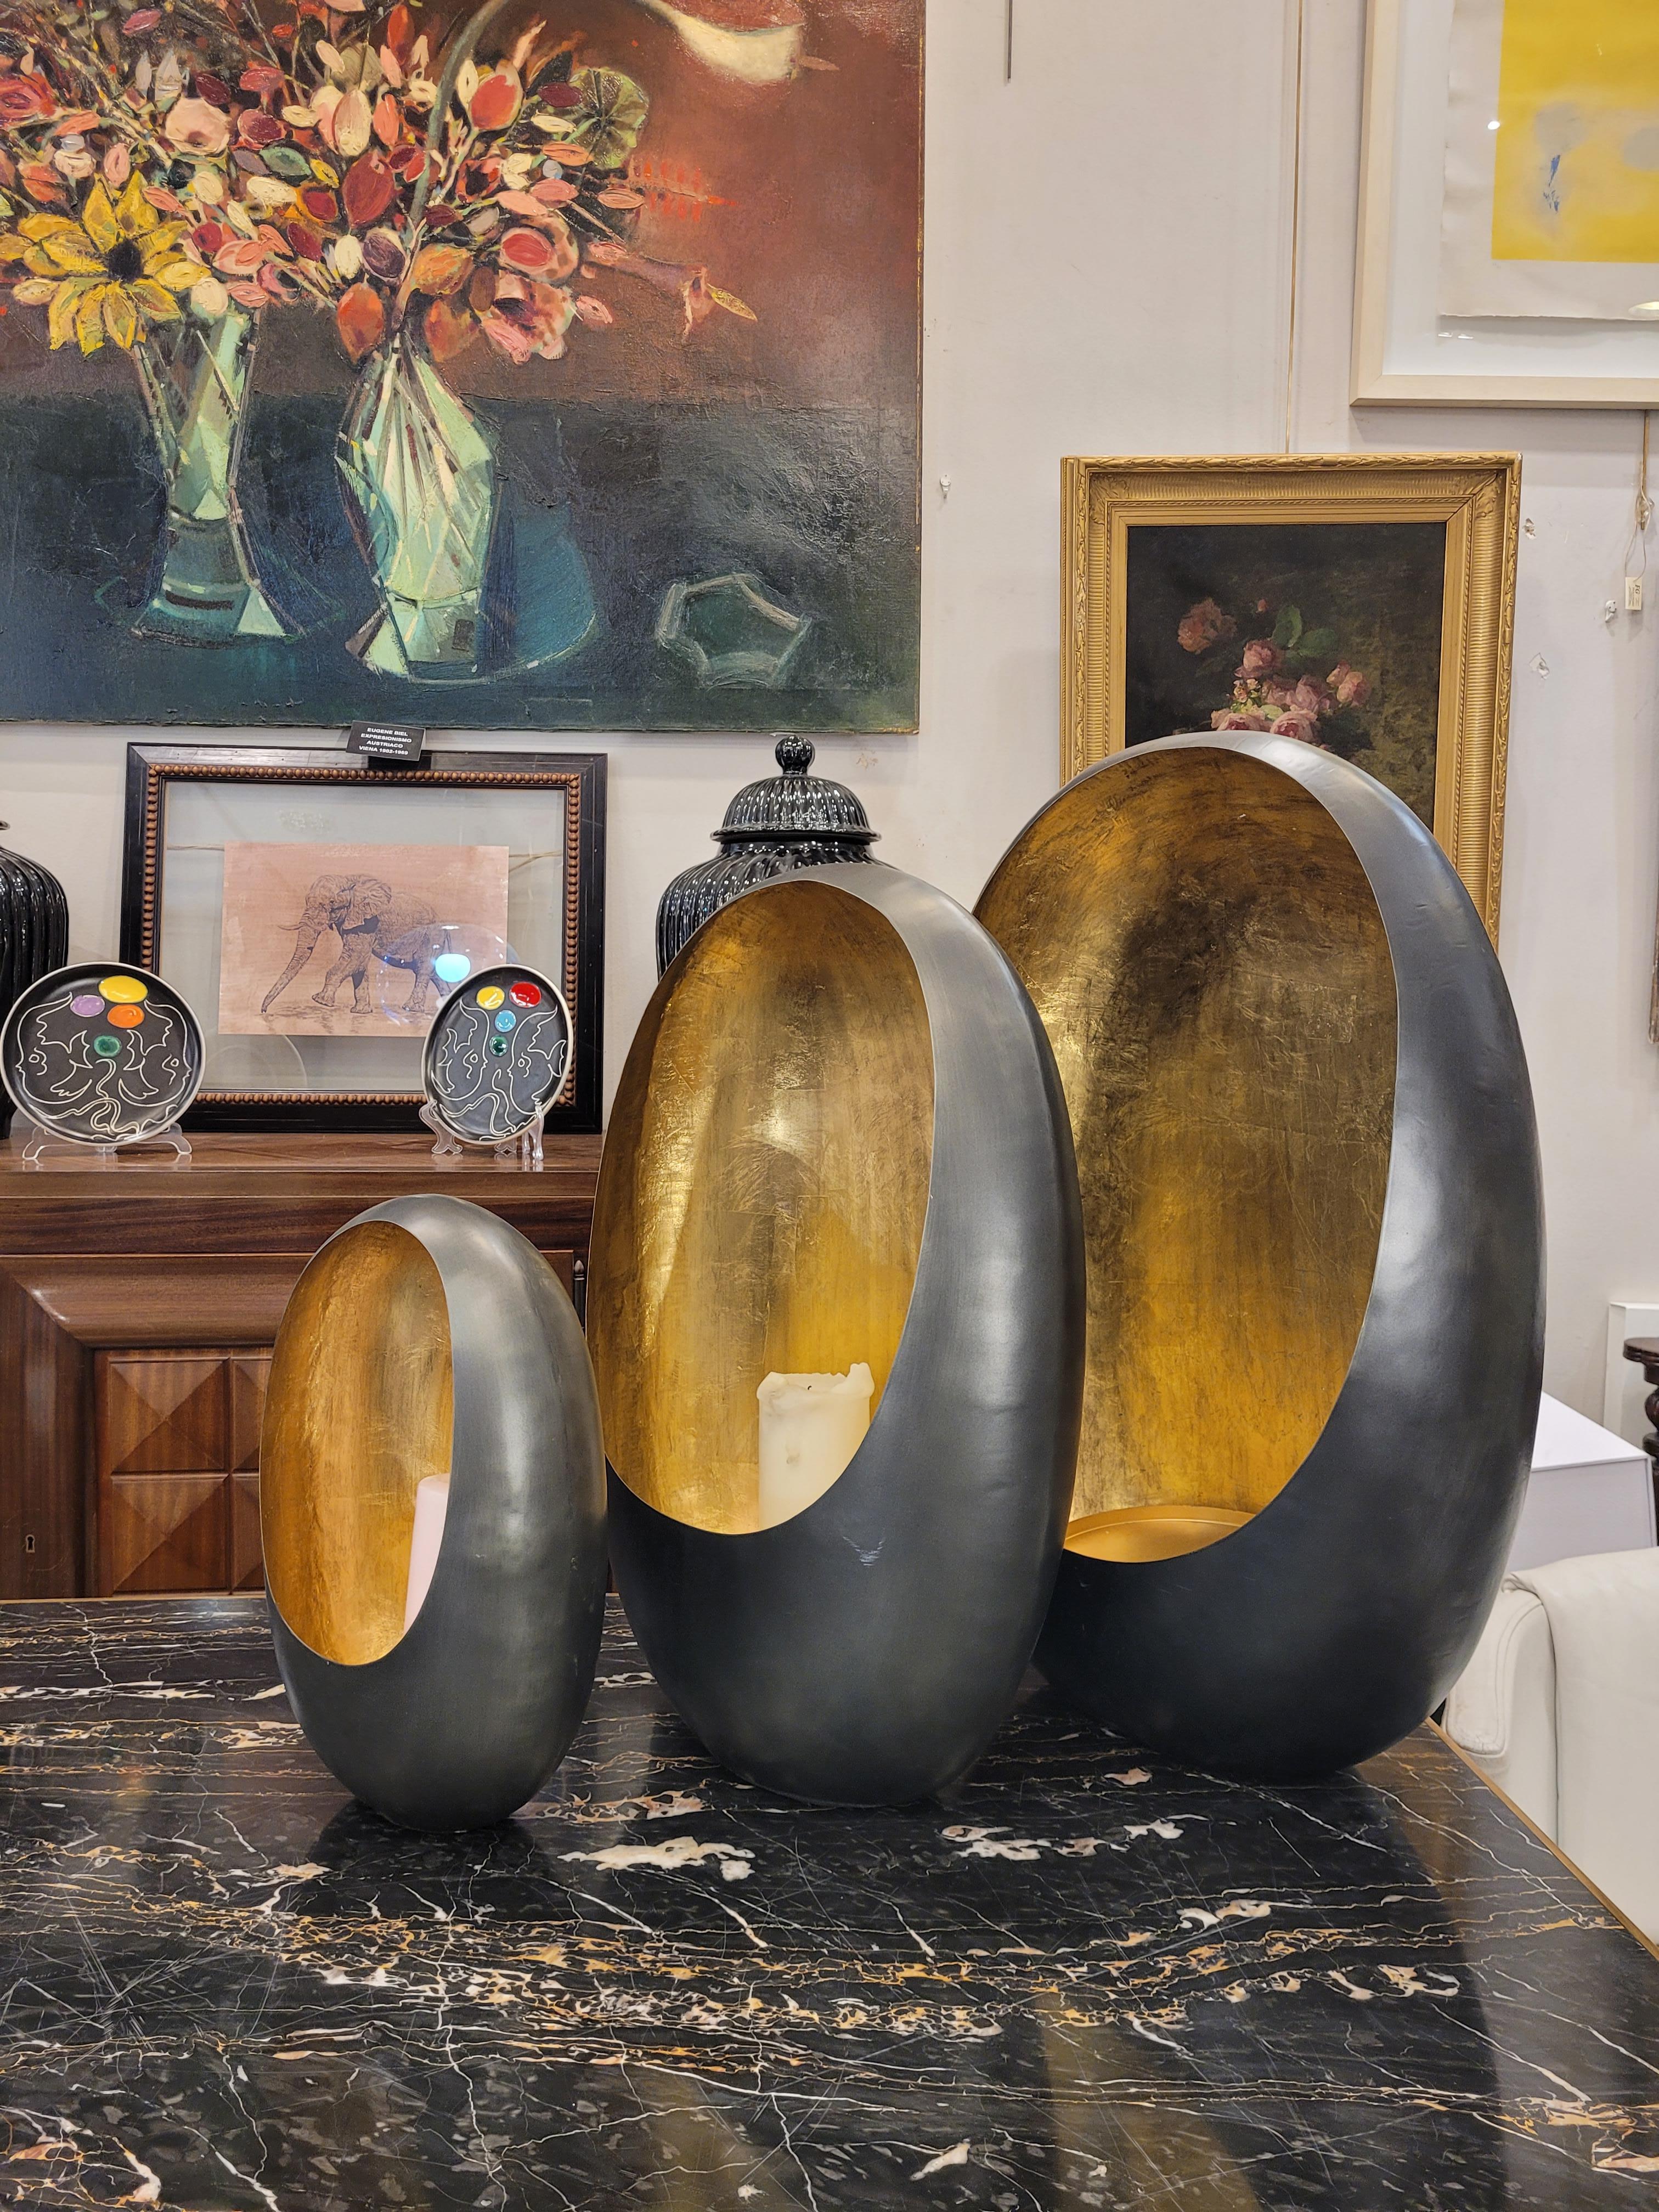 Extraordinary and gorgeous set of 3 lanterns or photophores, French candle holders, handmade, in golden brass on the inside and black on the outside.
With an oval profile, 3 pieces from largest to smallest, they are striking, original and very